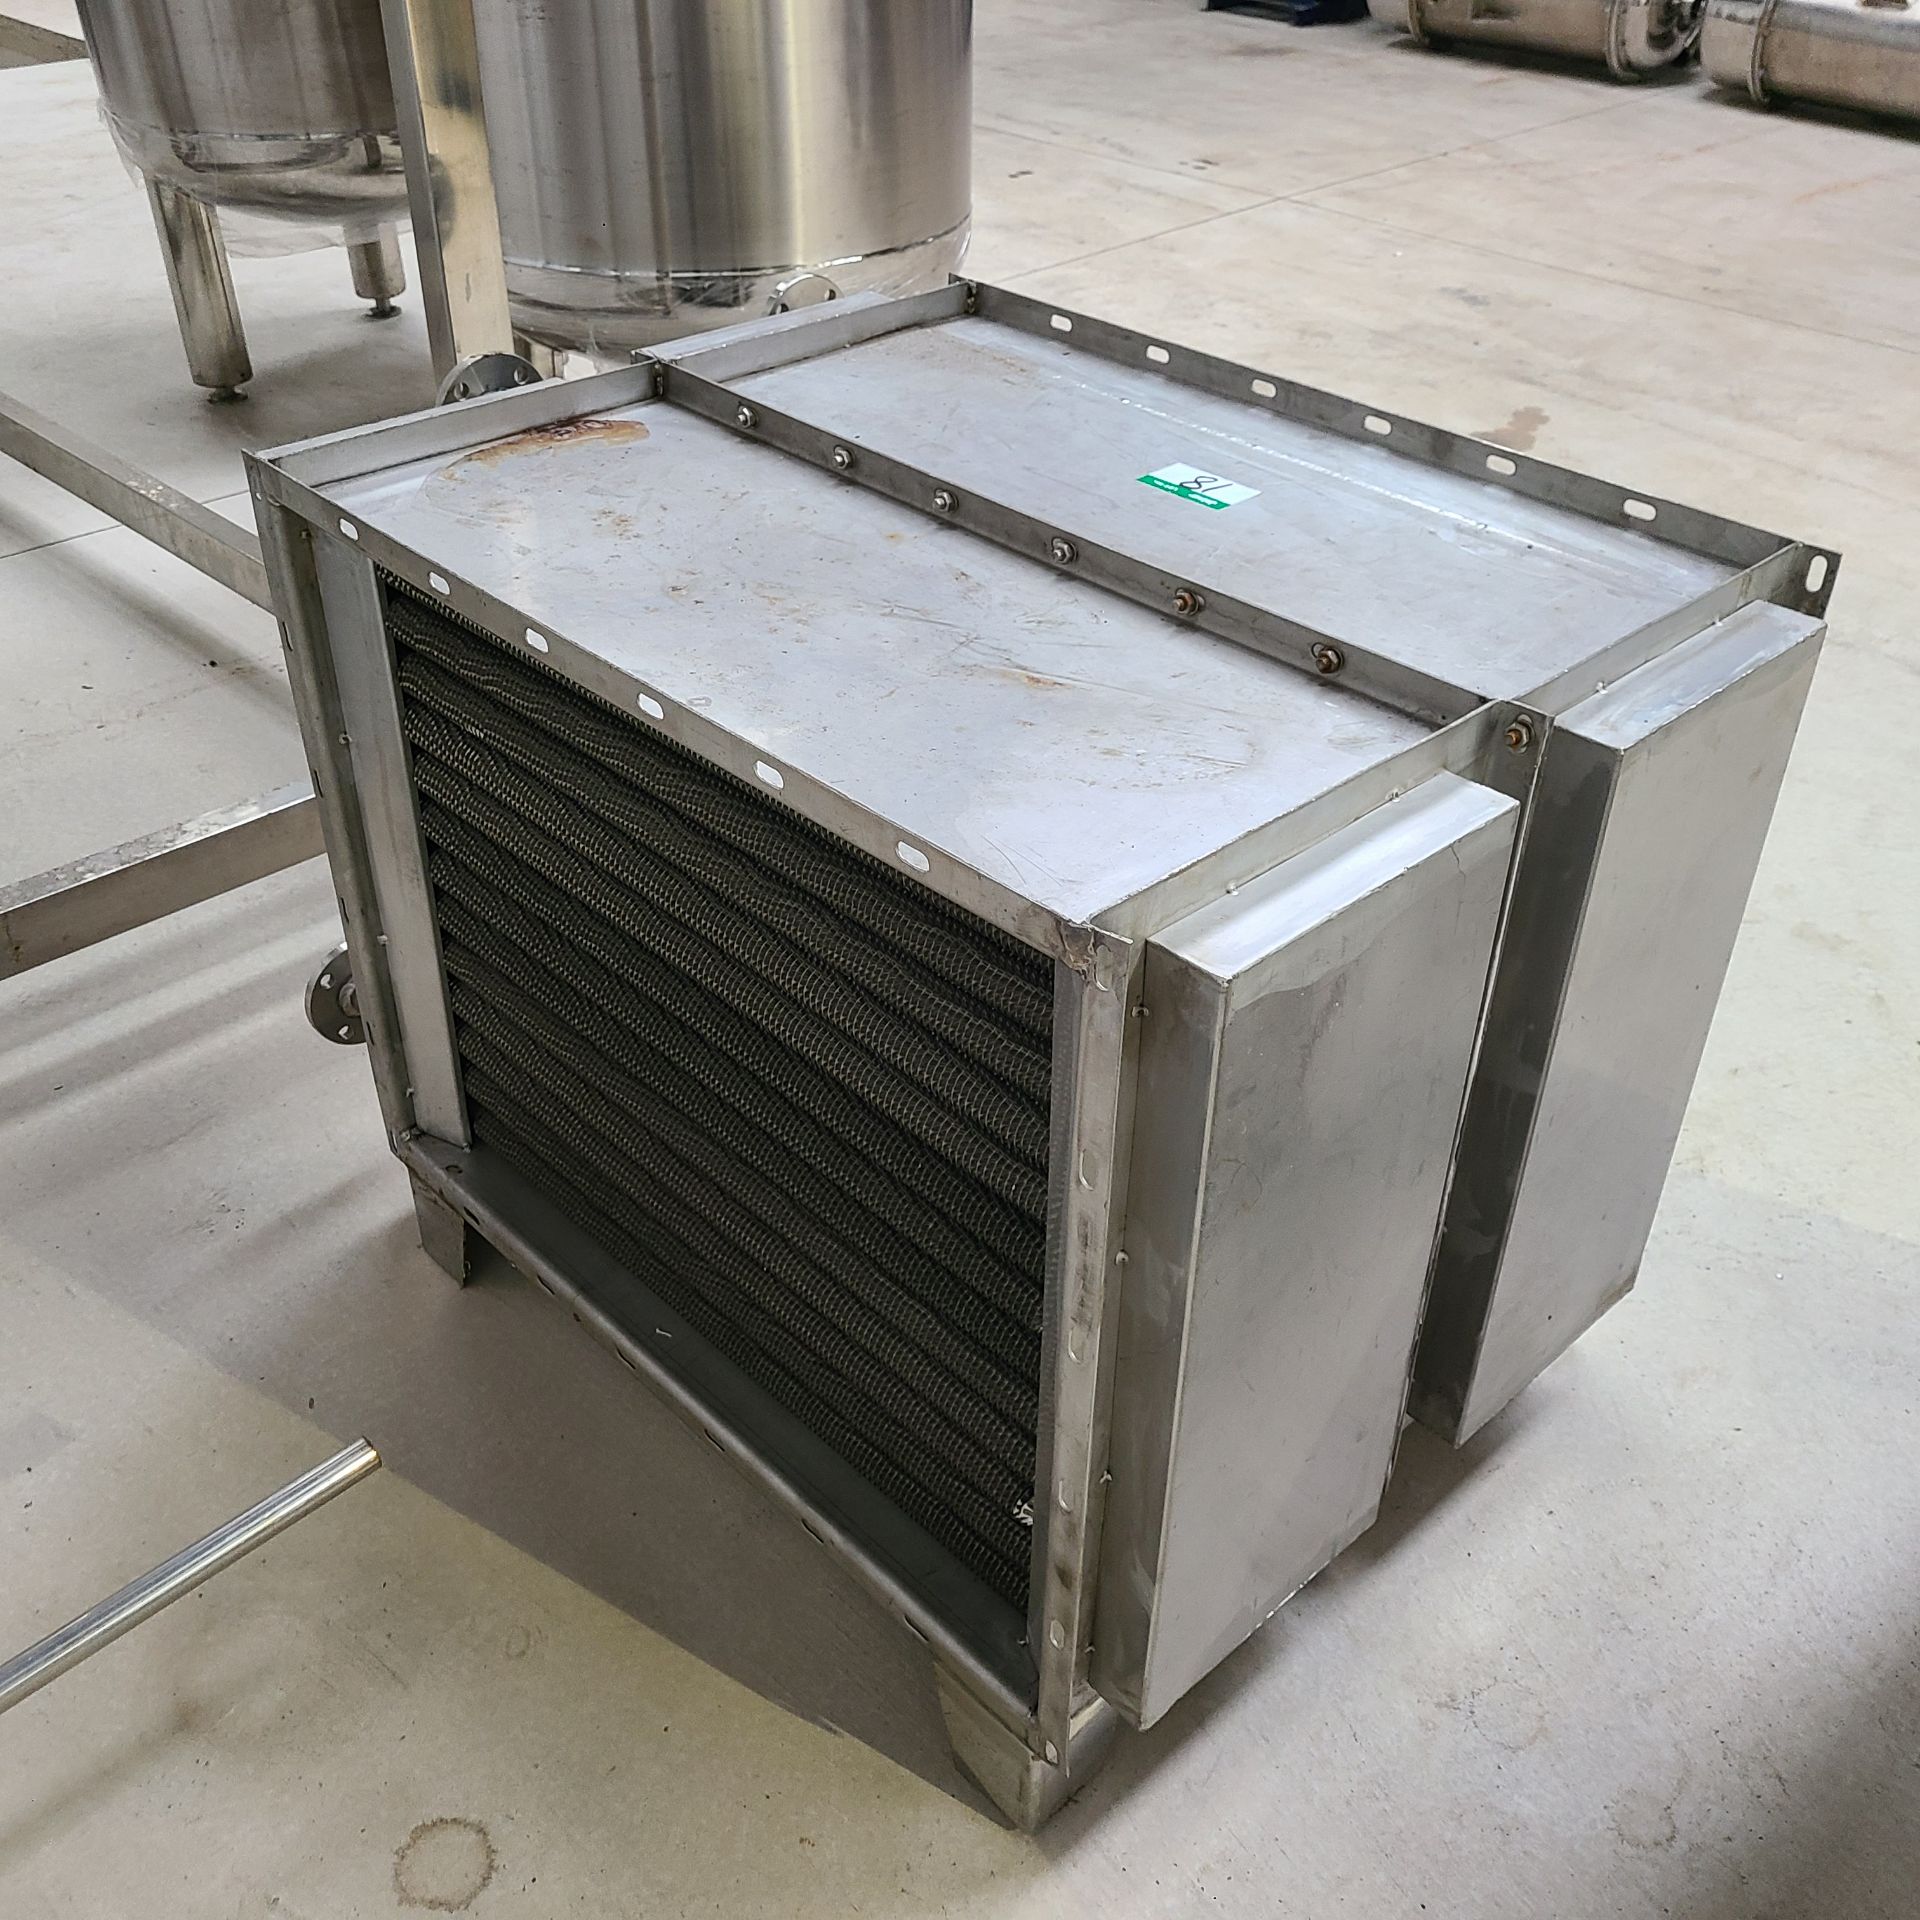 SS CONDENSING UNIT 40 1/2 L x 28 IN. W x 30 IN. H - Image 3 of 5